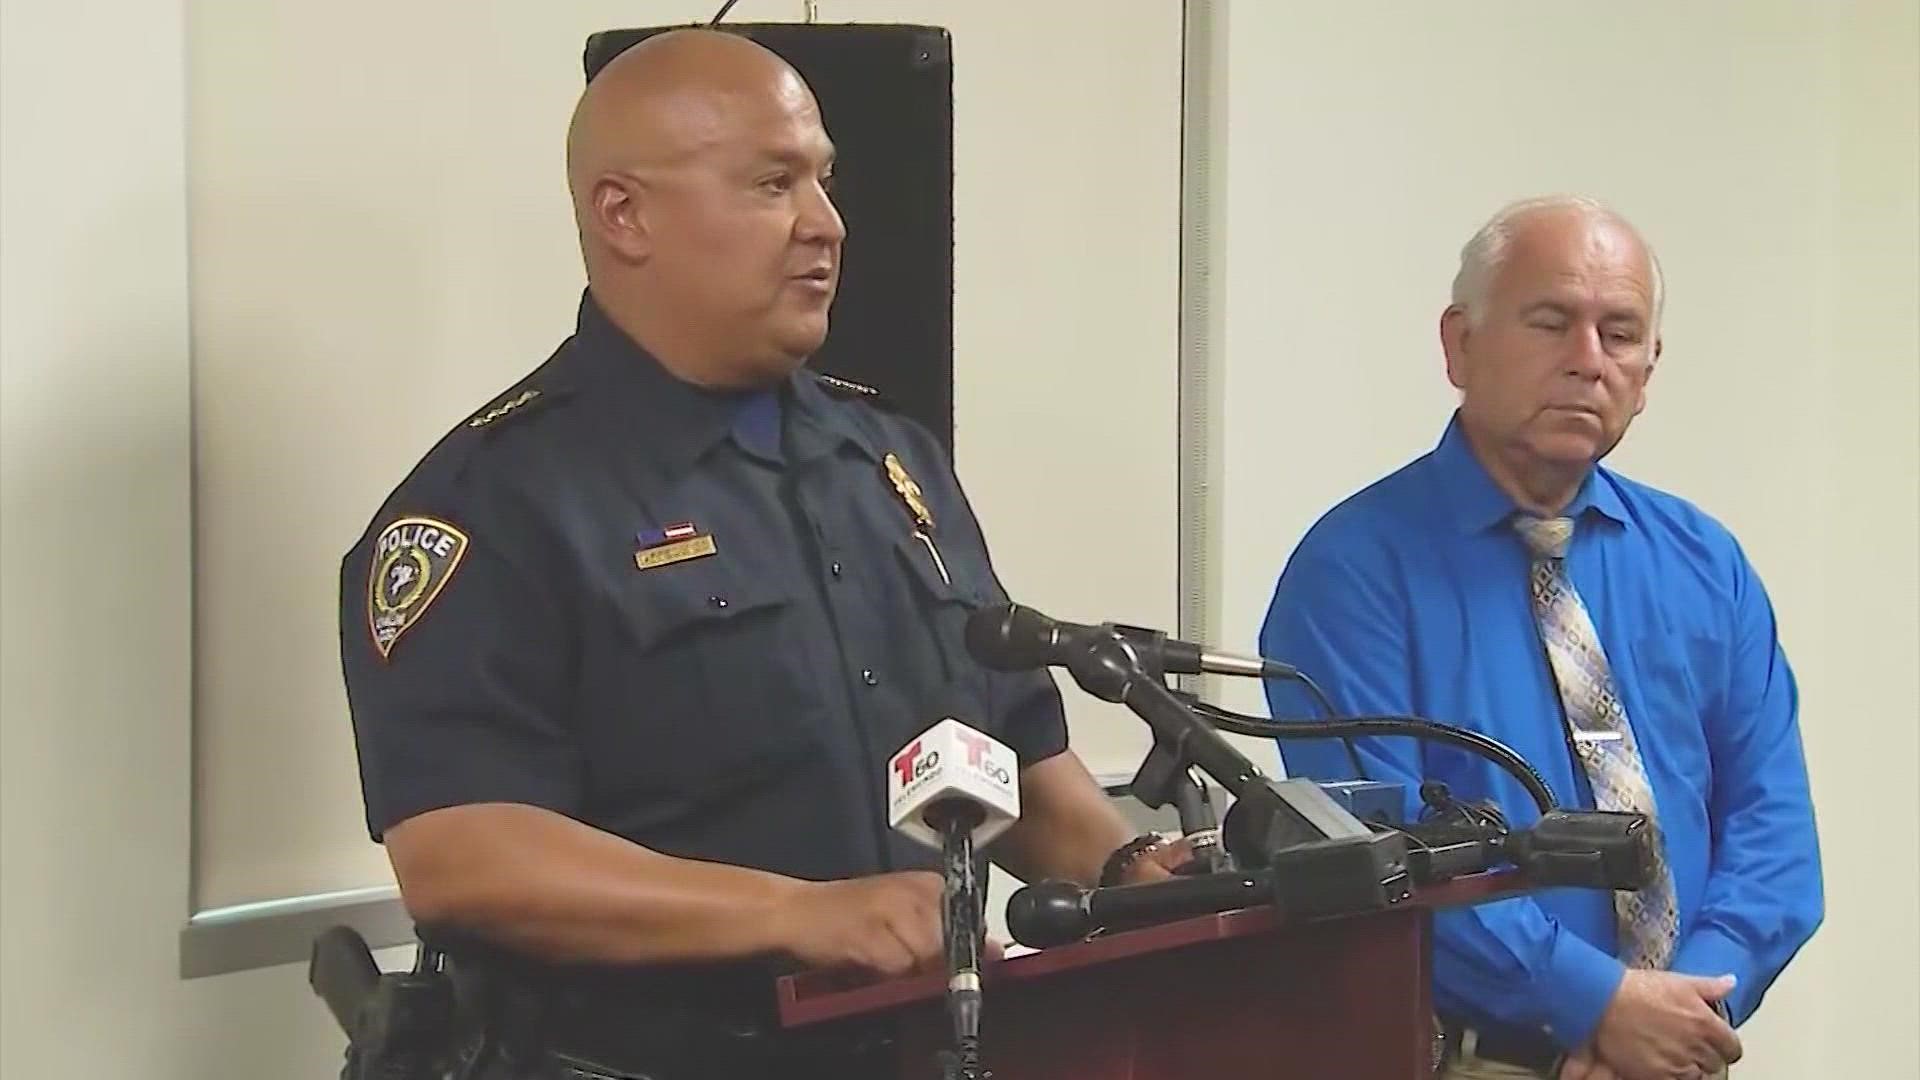 Texas DPS said the chief of police has not been responding to a request for a follow-up interview in regards to the Uvalde police response investigation.